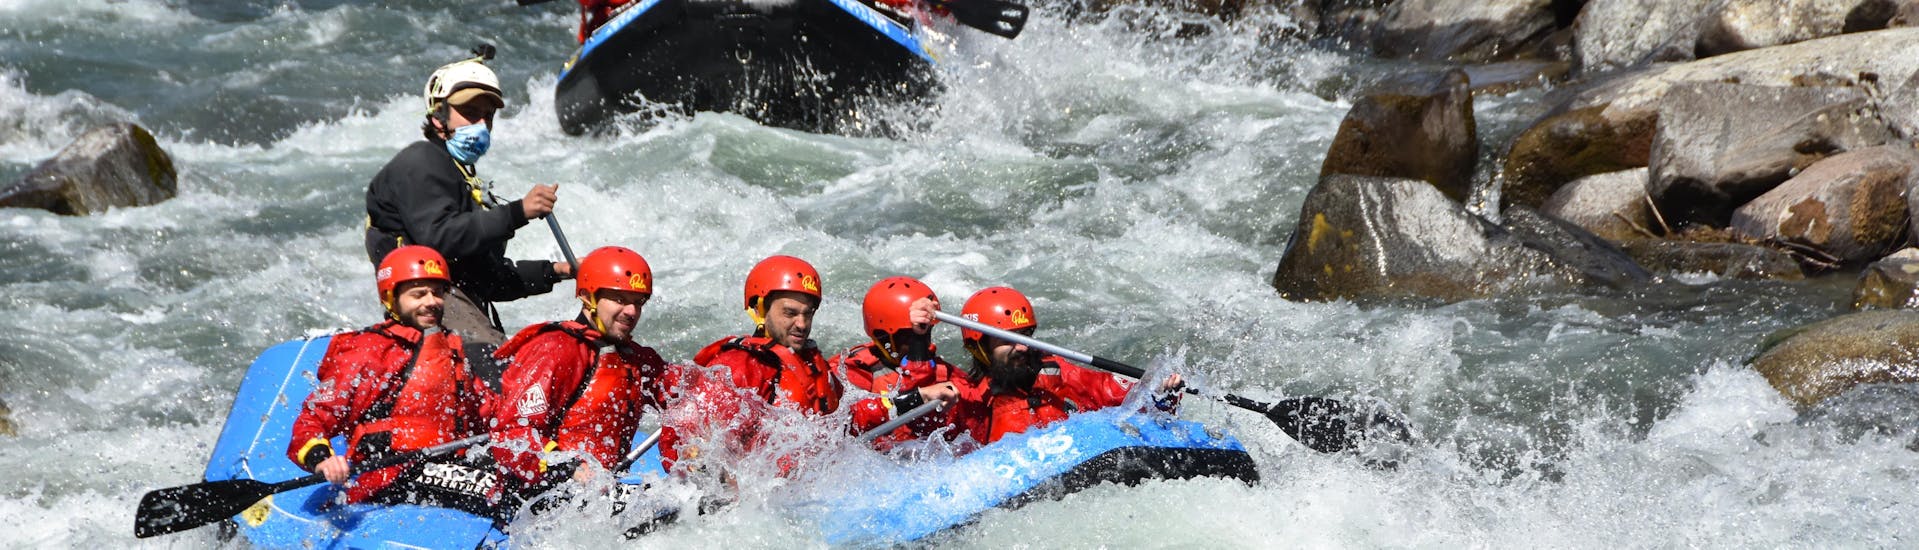 Rafting on the Noce River in Val di Sole - Long Descent.